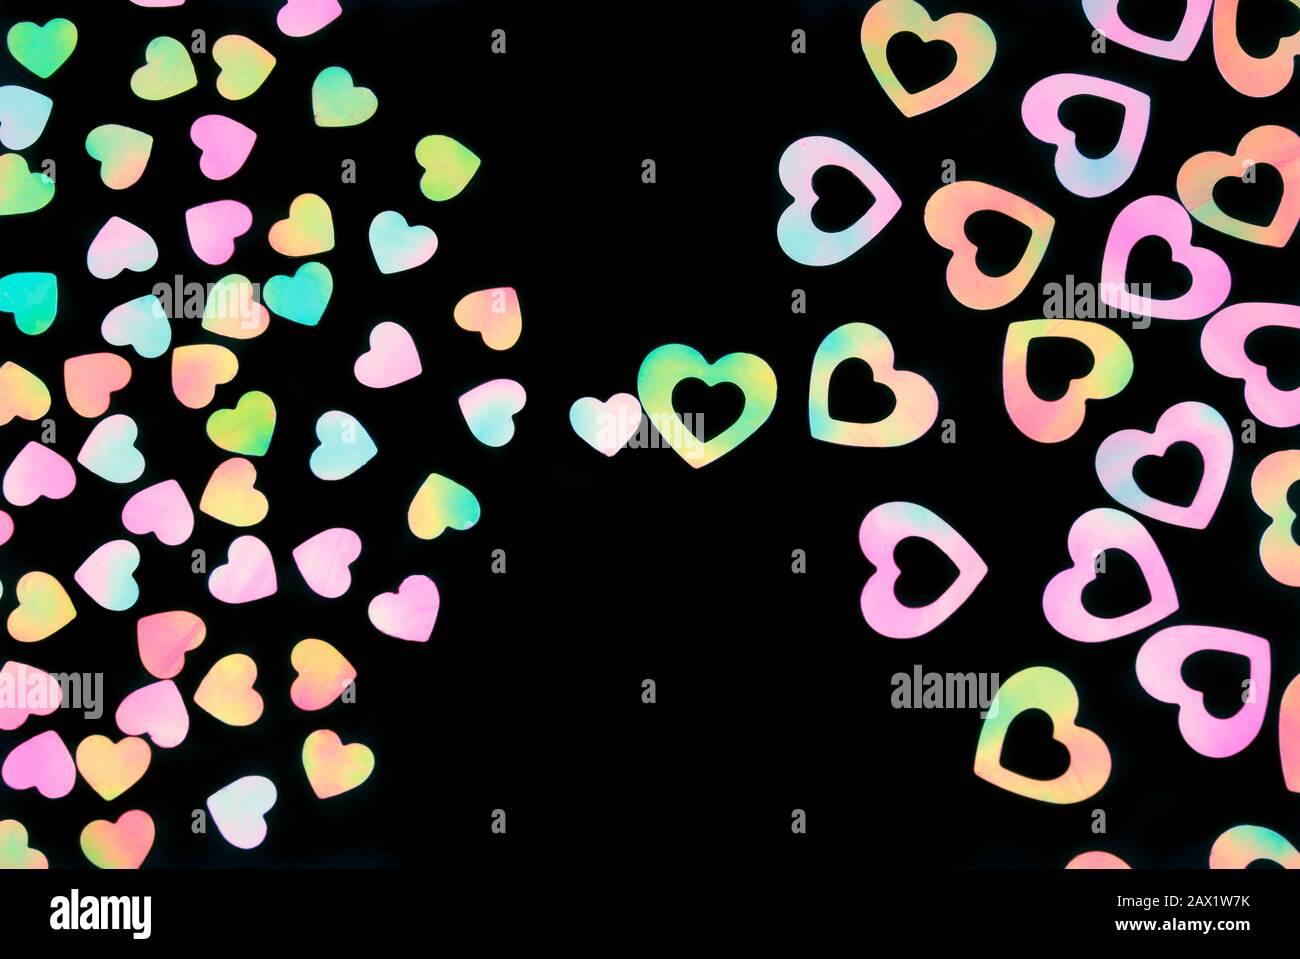 Colorful iridescent hearts attracting together in the center of a black background Stock Photo